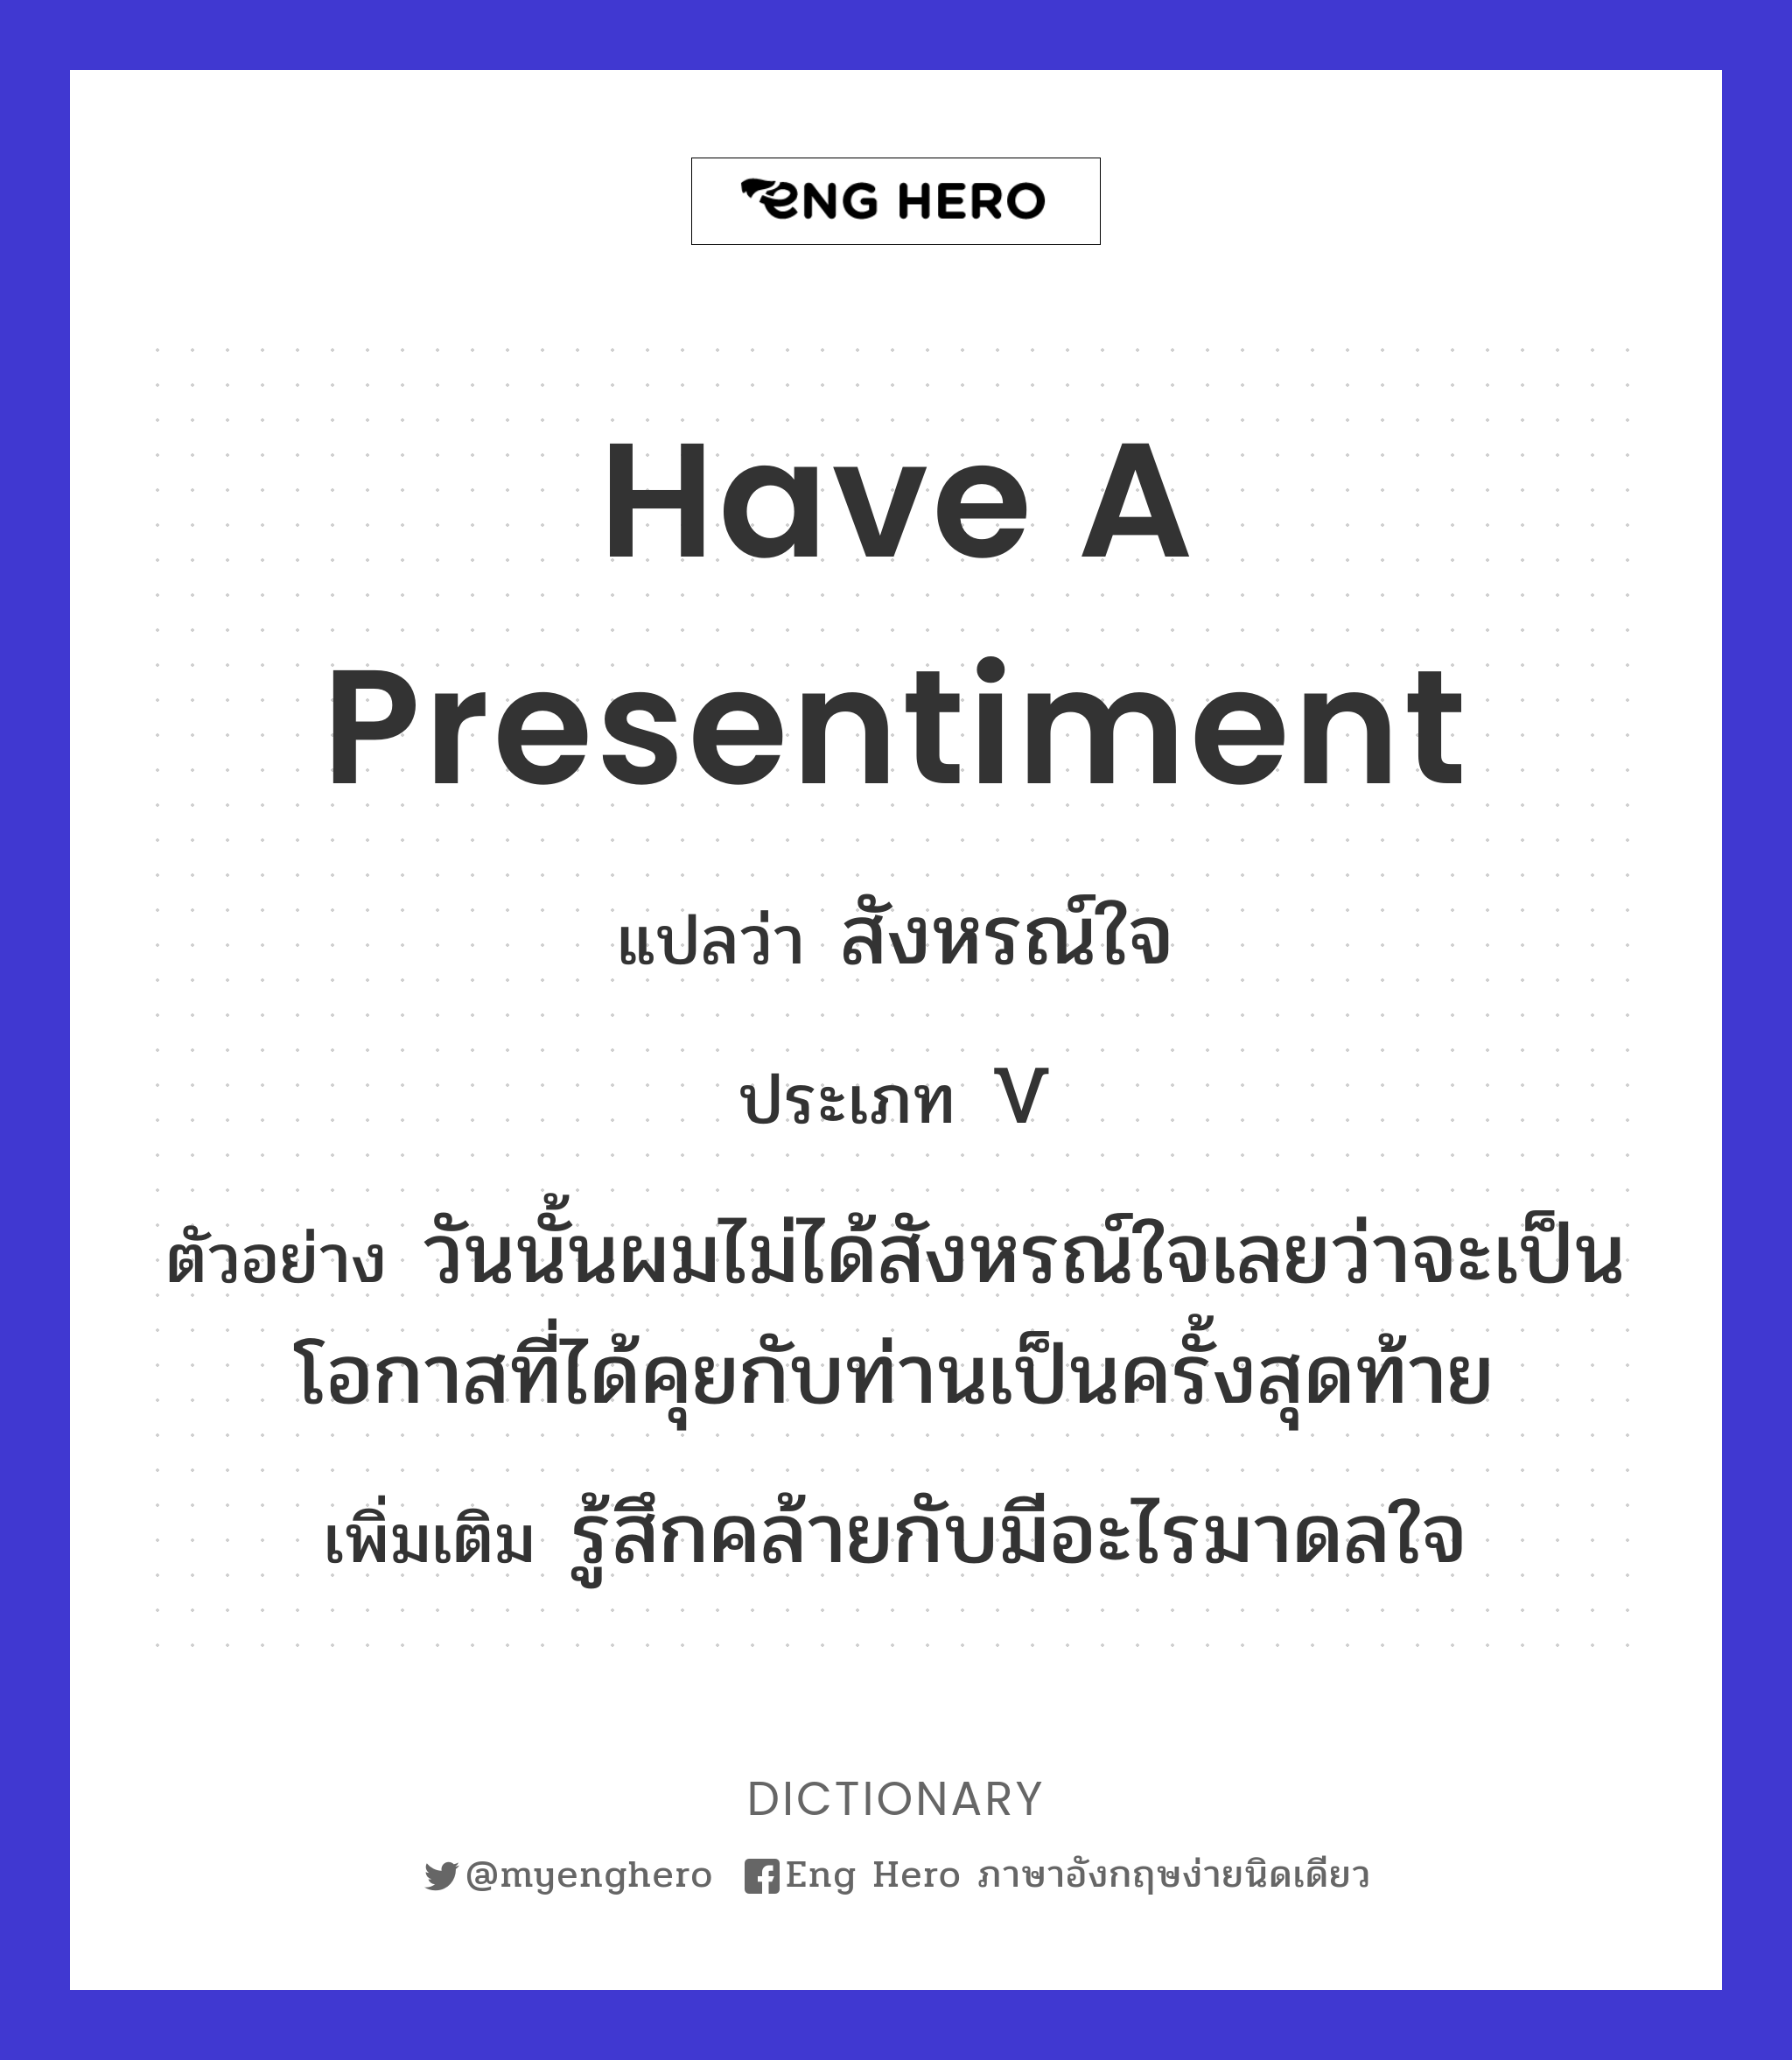 have a presentiment